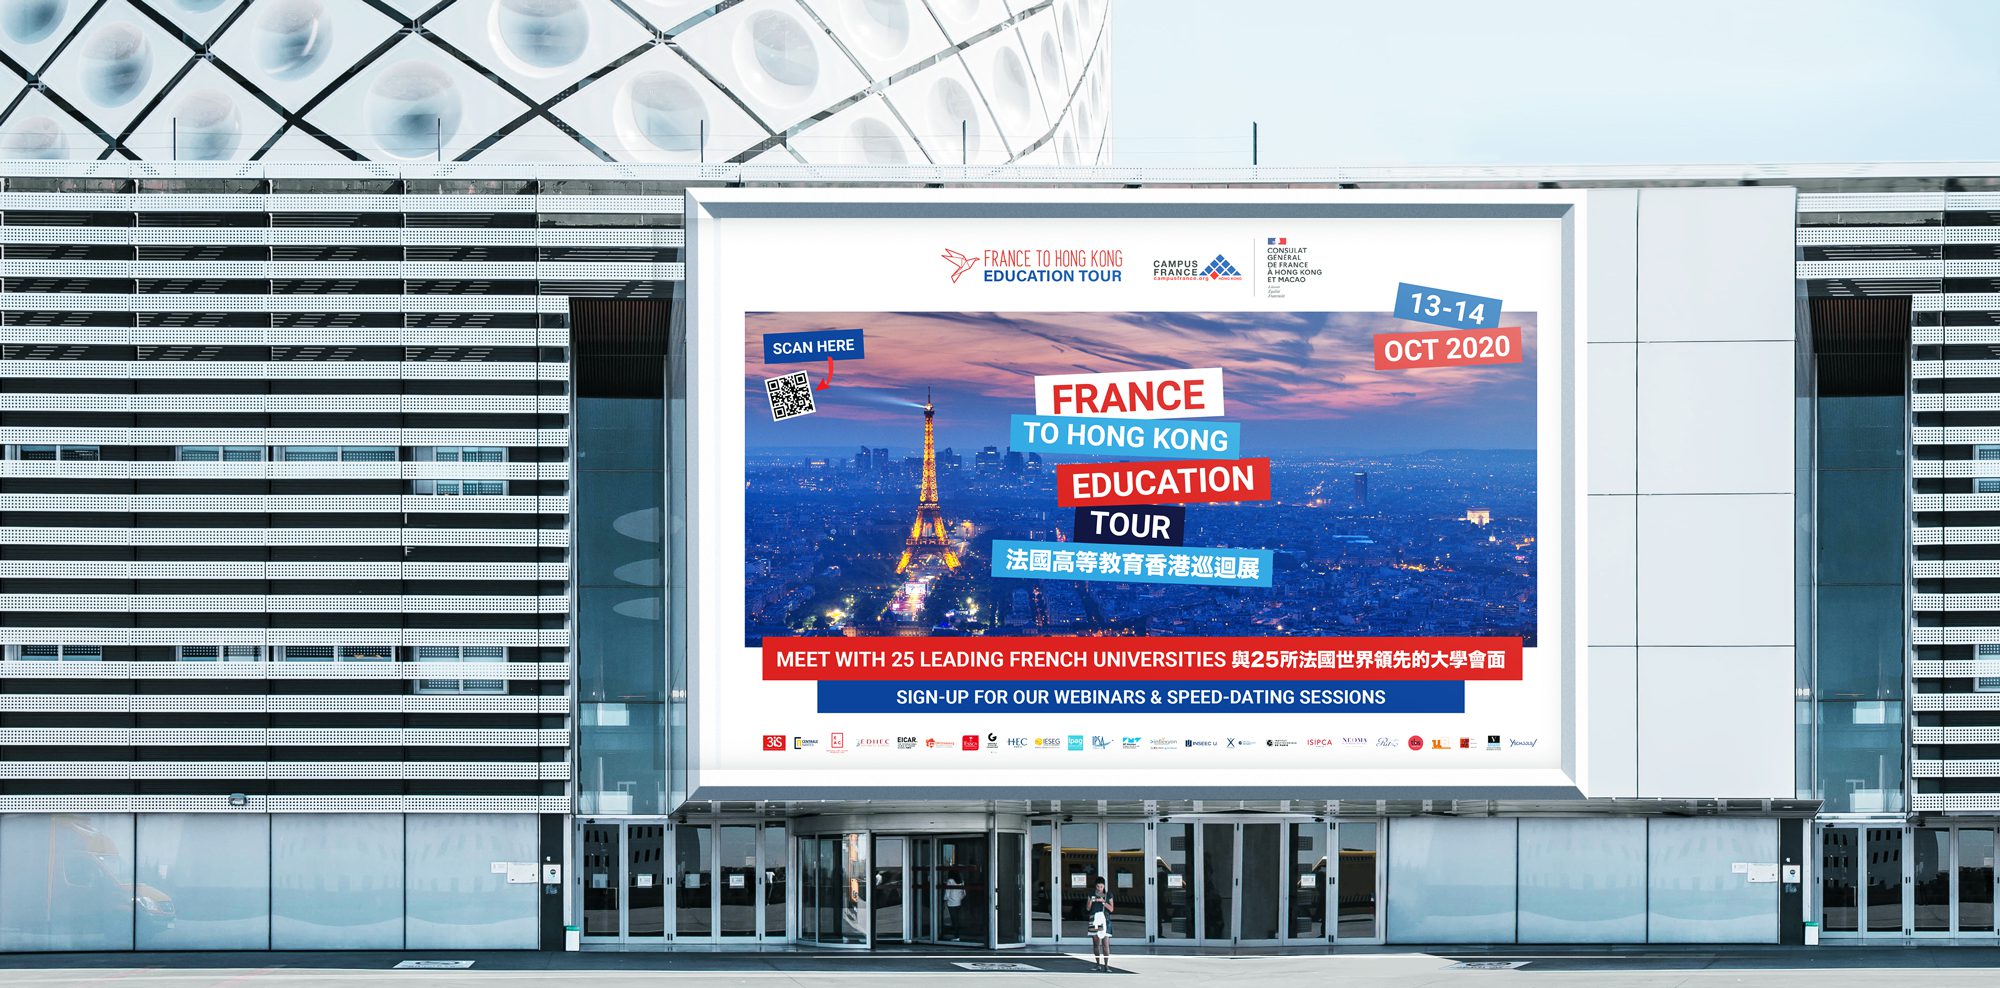 Campus France France to Hong Kong Education Tour marketing campagne displayed outside a modern building